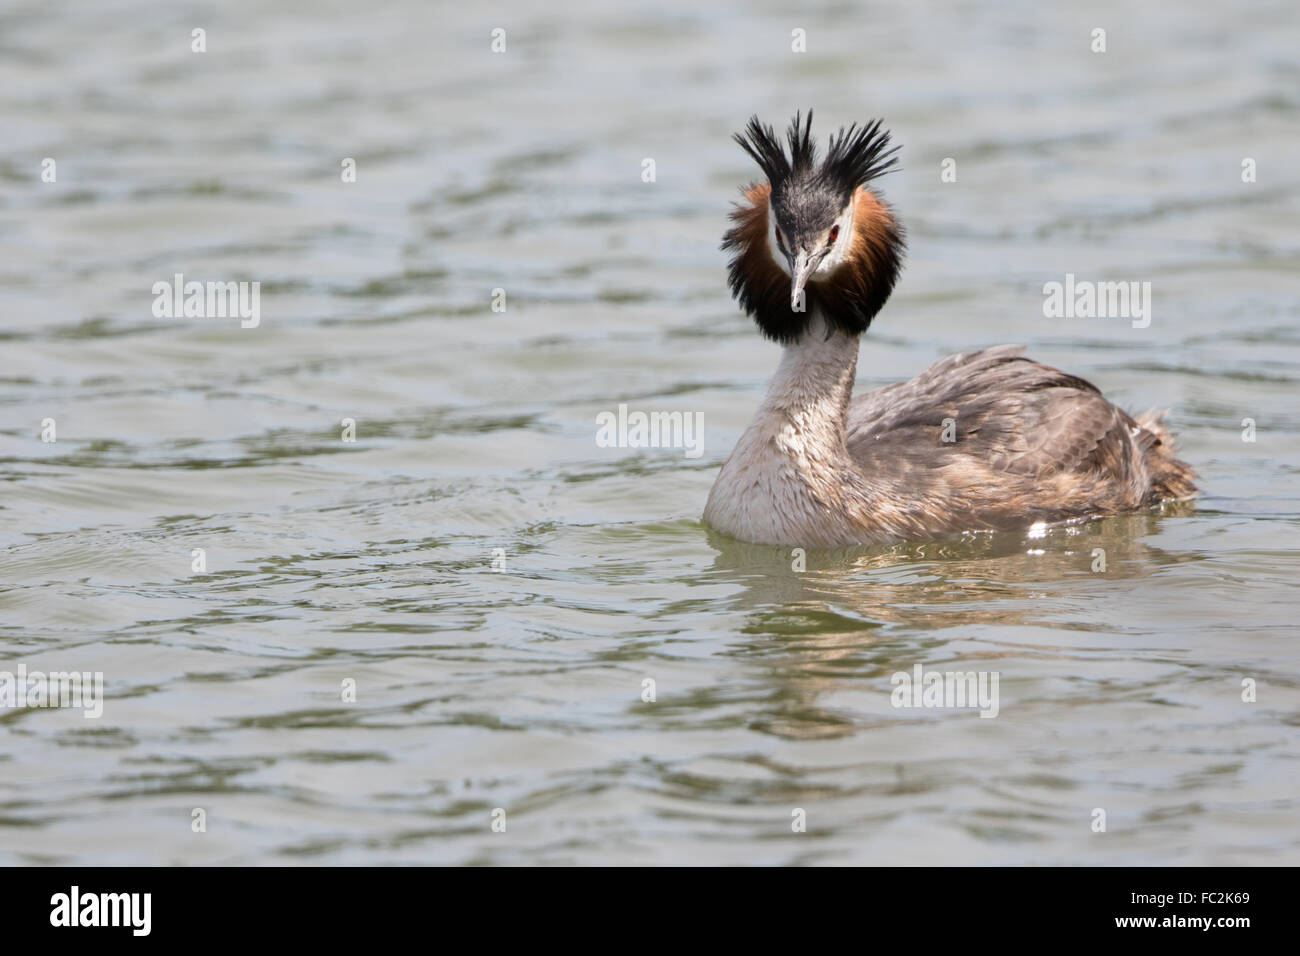 Great Crested Grebe Stockfoto